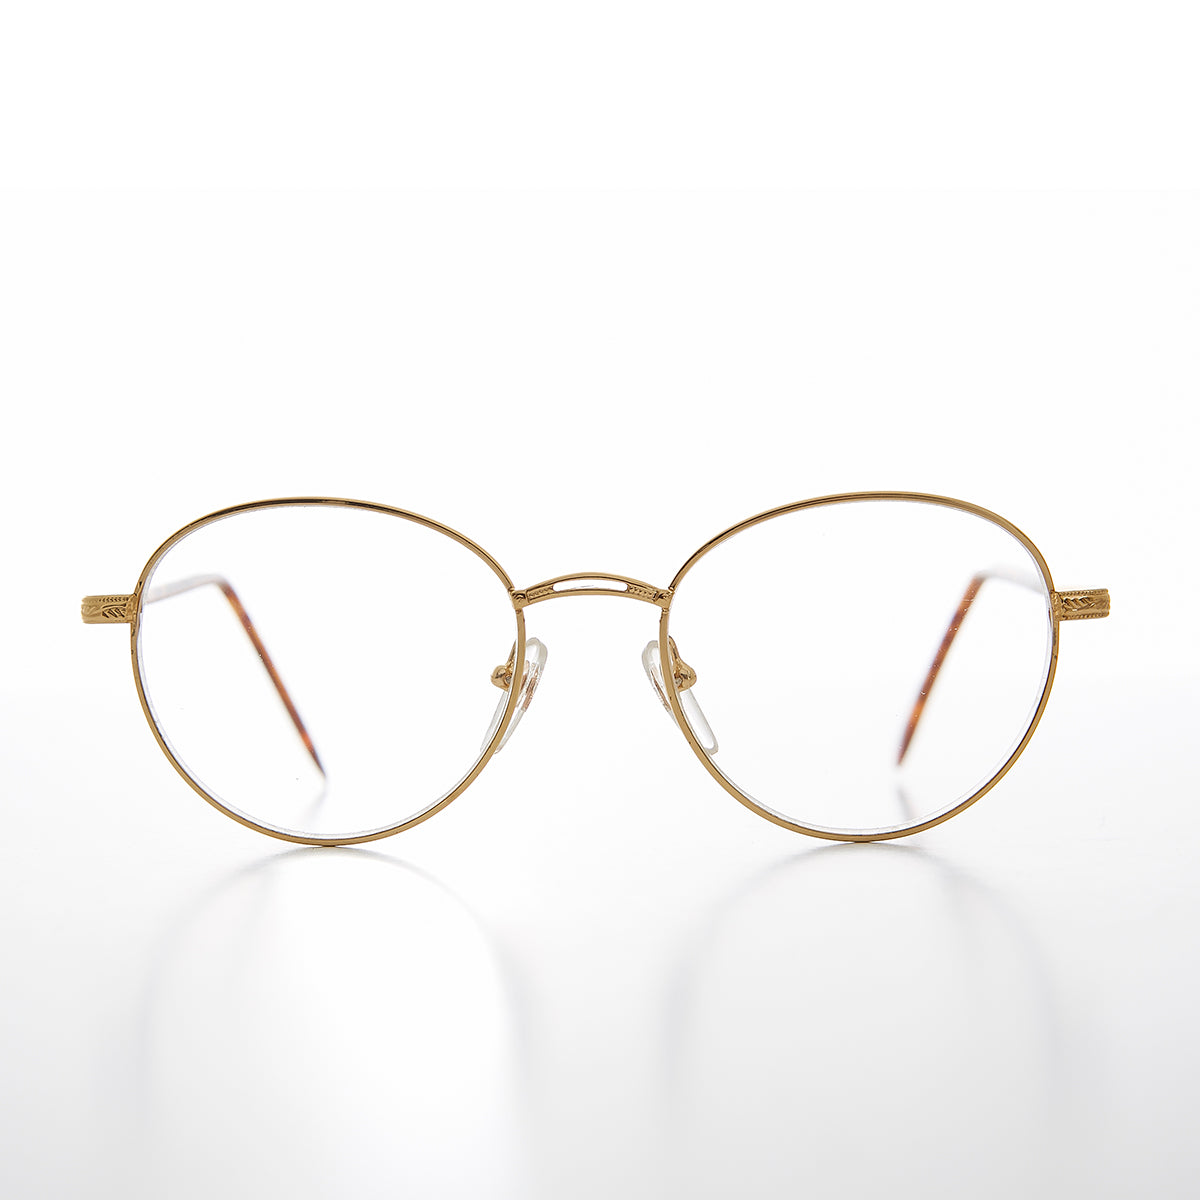 Round Gold Reading Glasses with Tube Temples